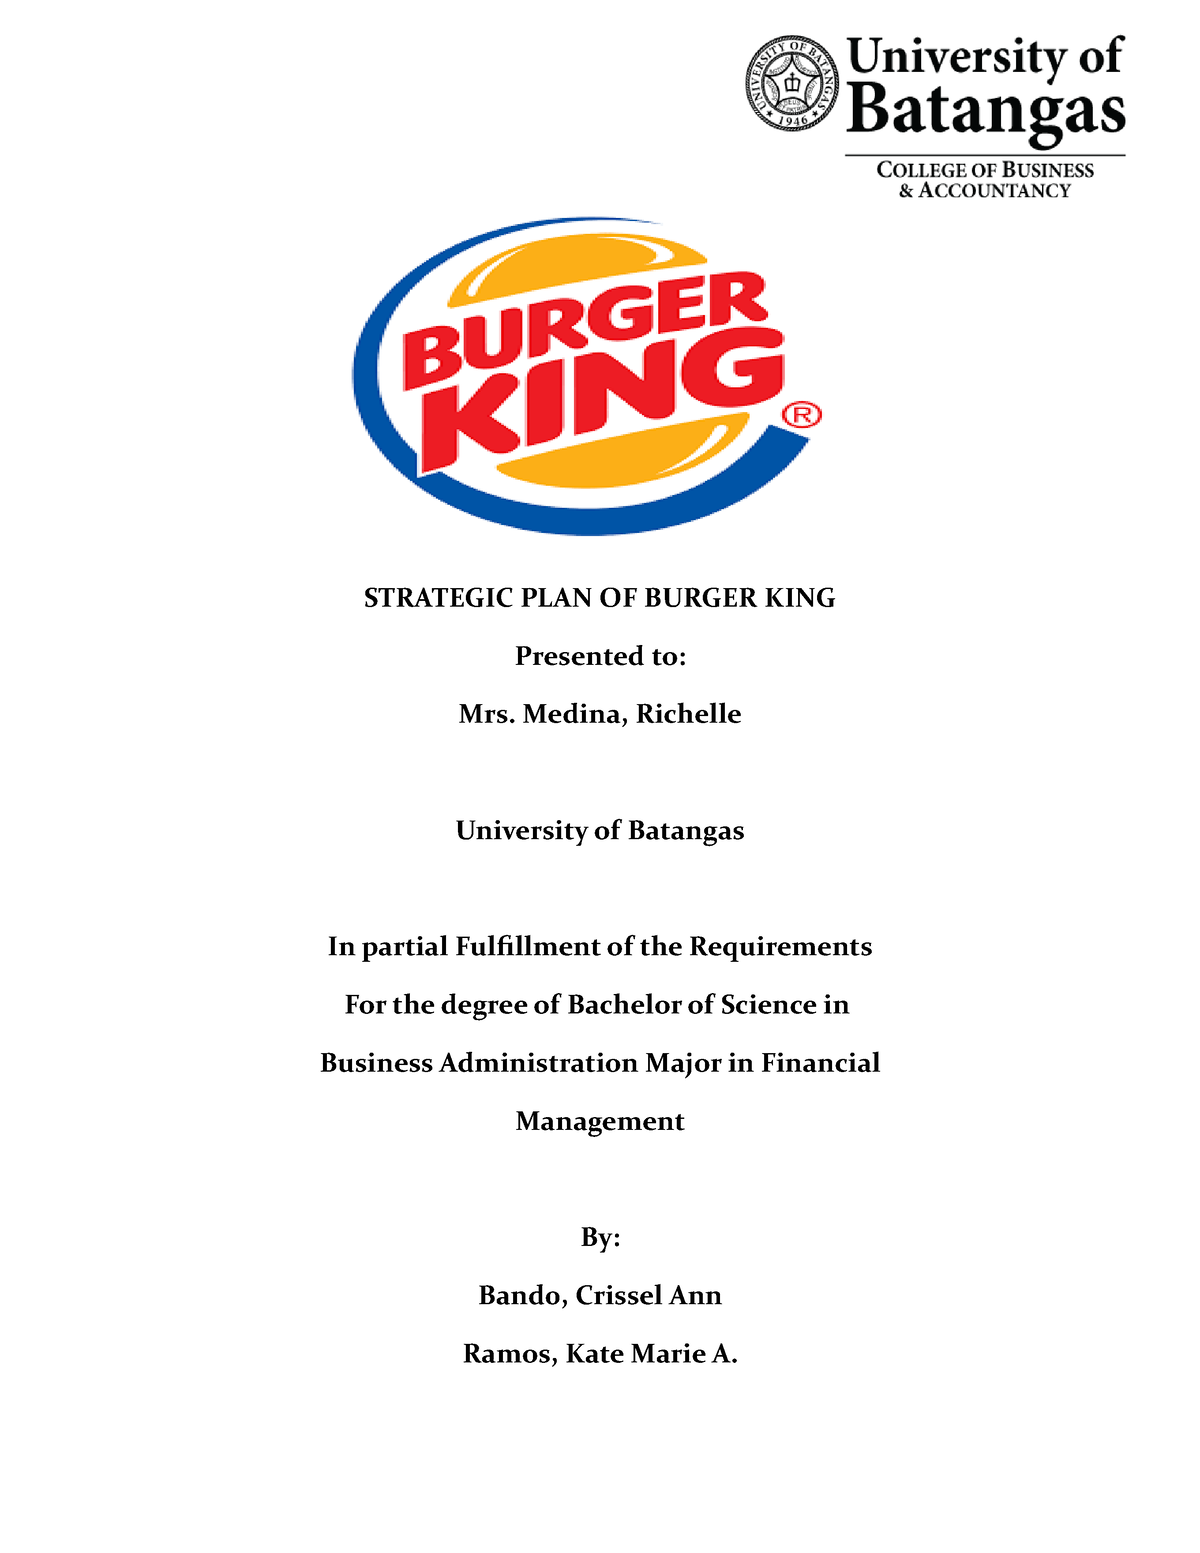 business plan project on burger